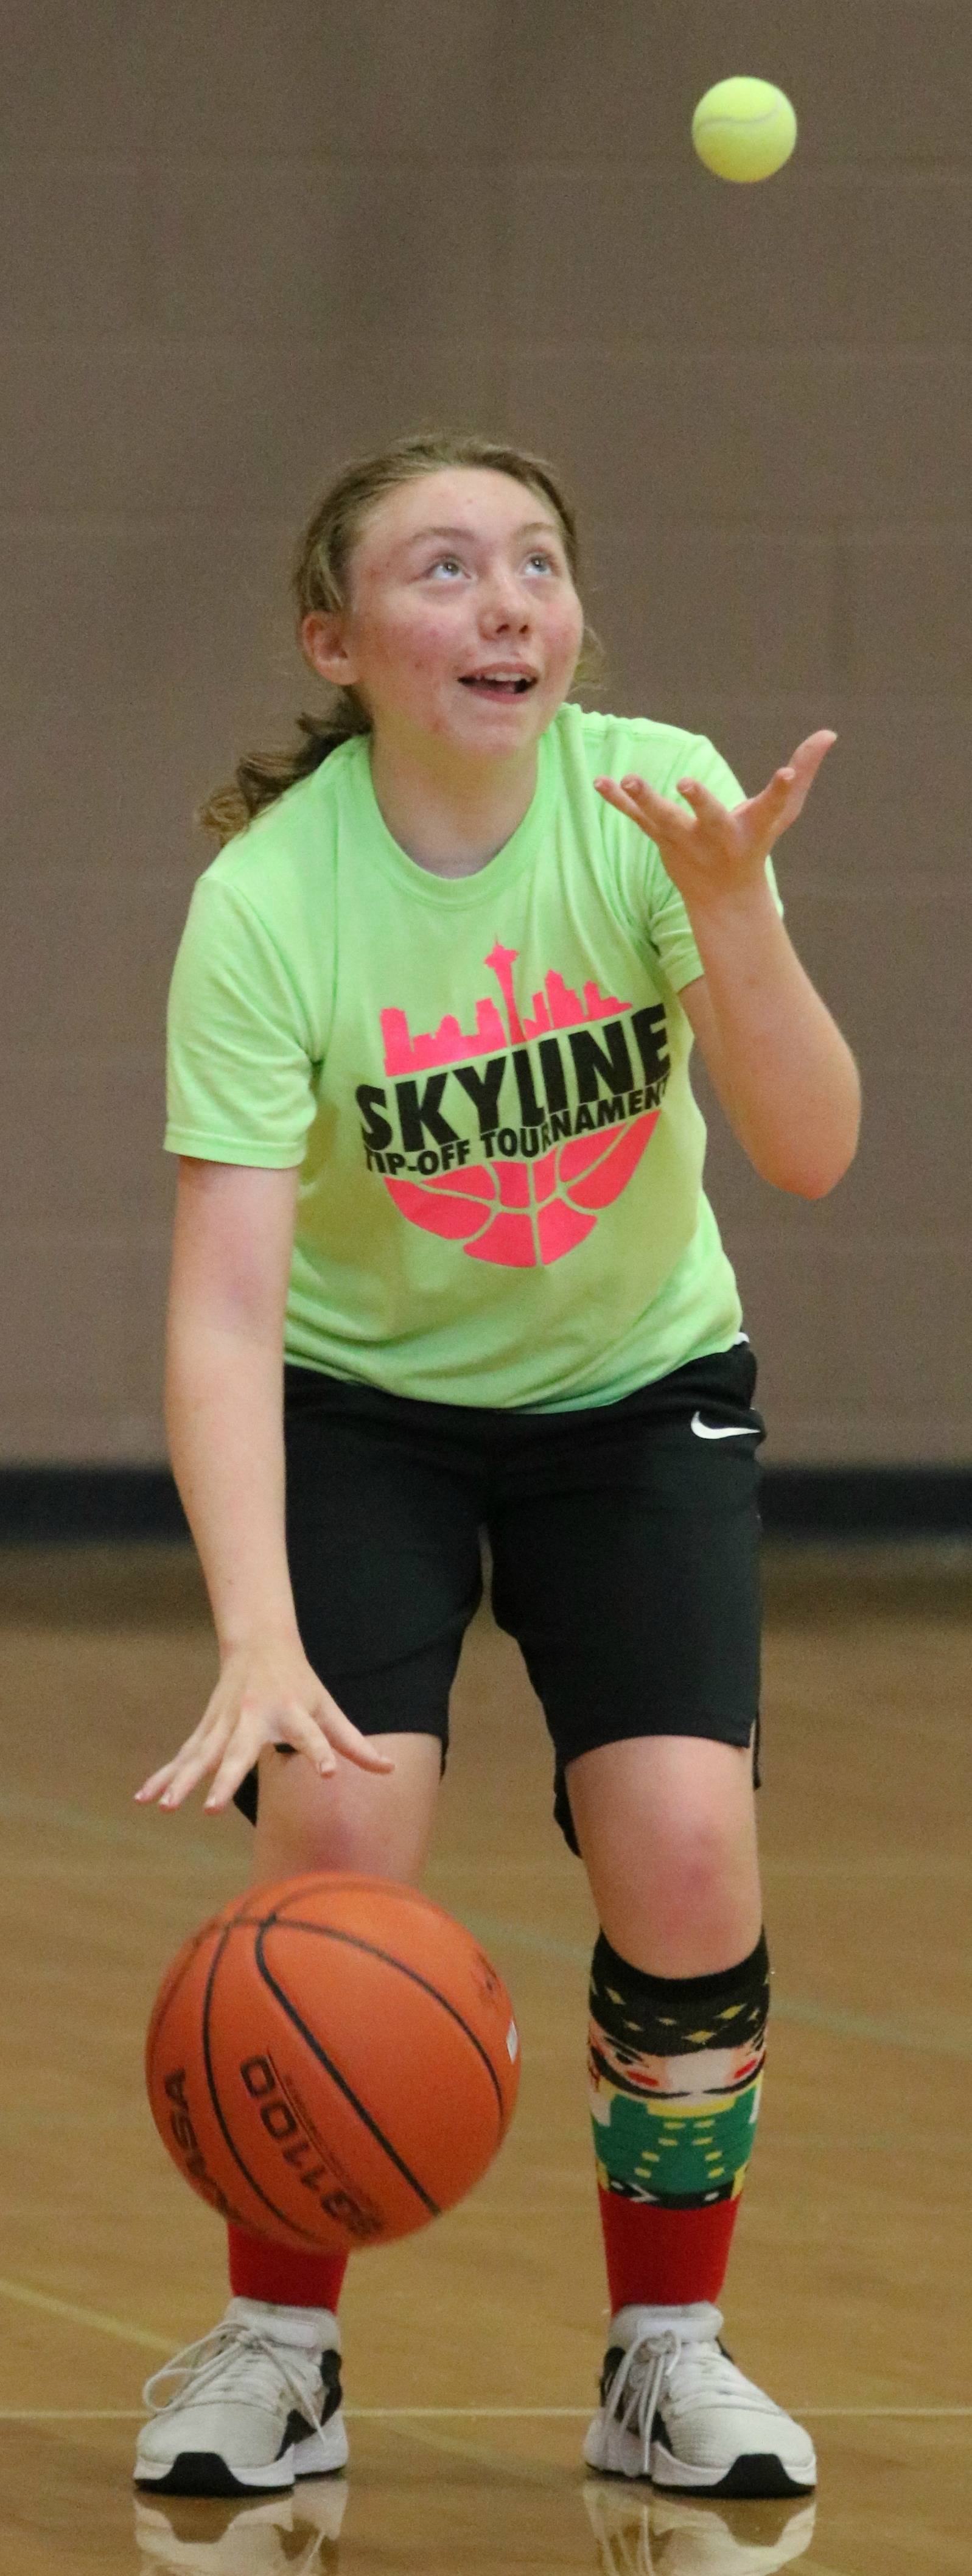 Emily Wren practices her dribbling skills while tossing a tennis ball at the Redmond High School Girls Basketball Summer Camp on June 26. Andy Nystrom / staff photo